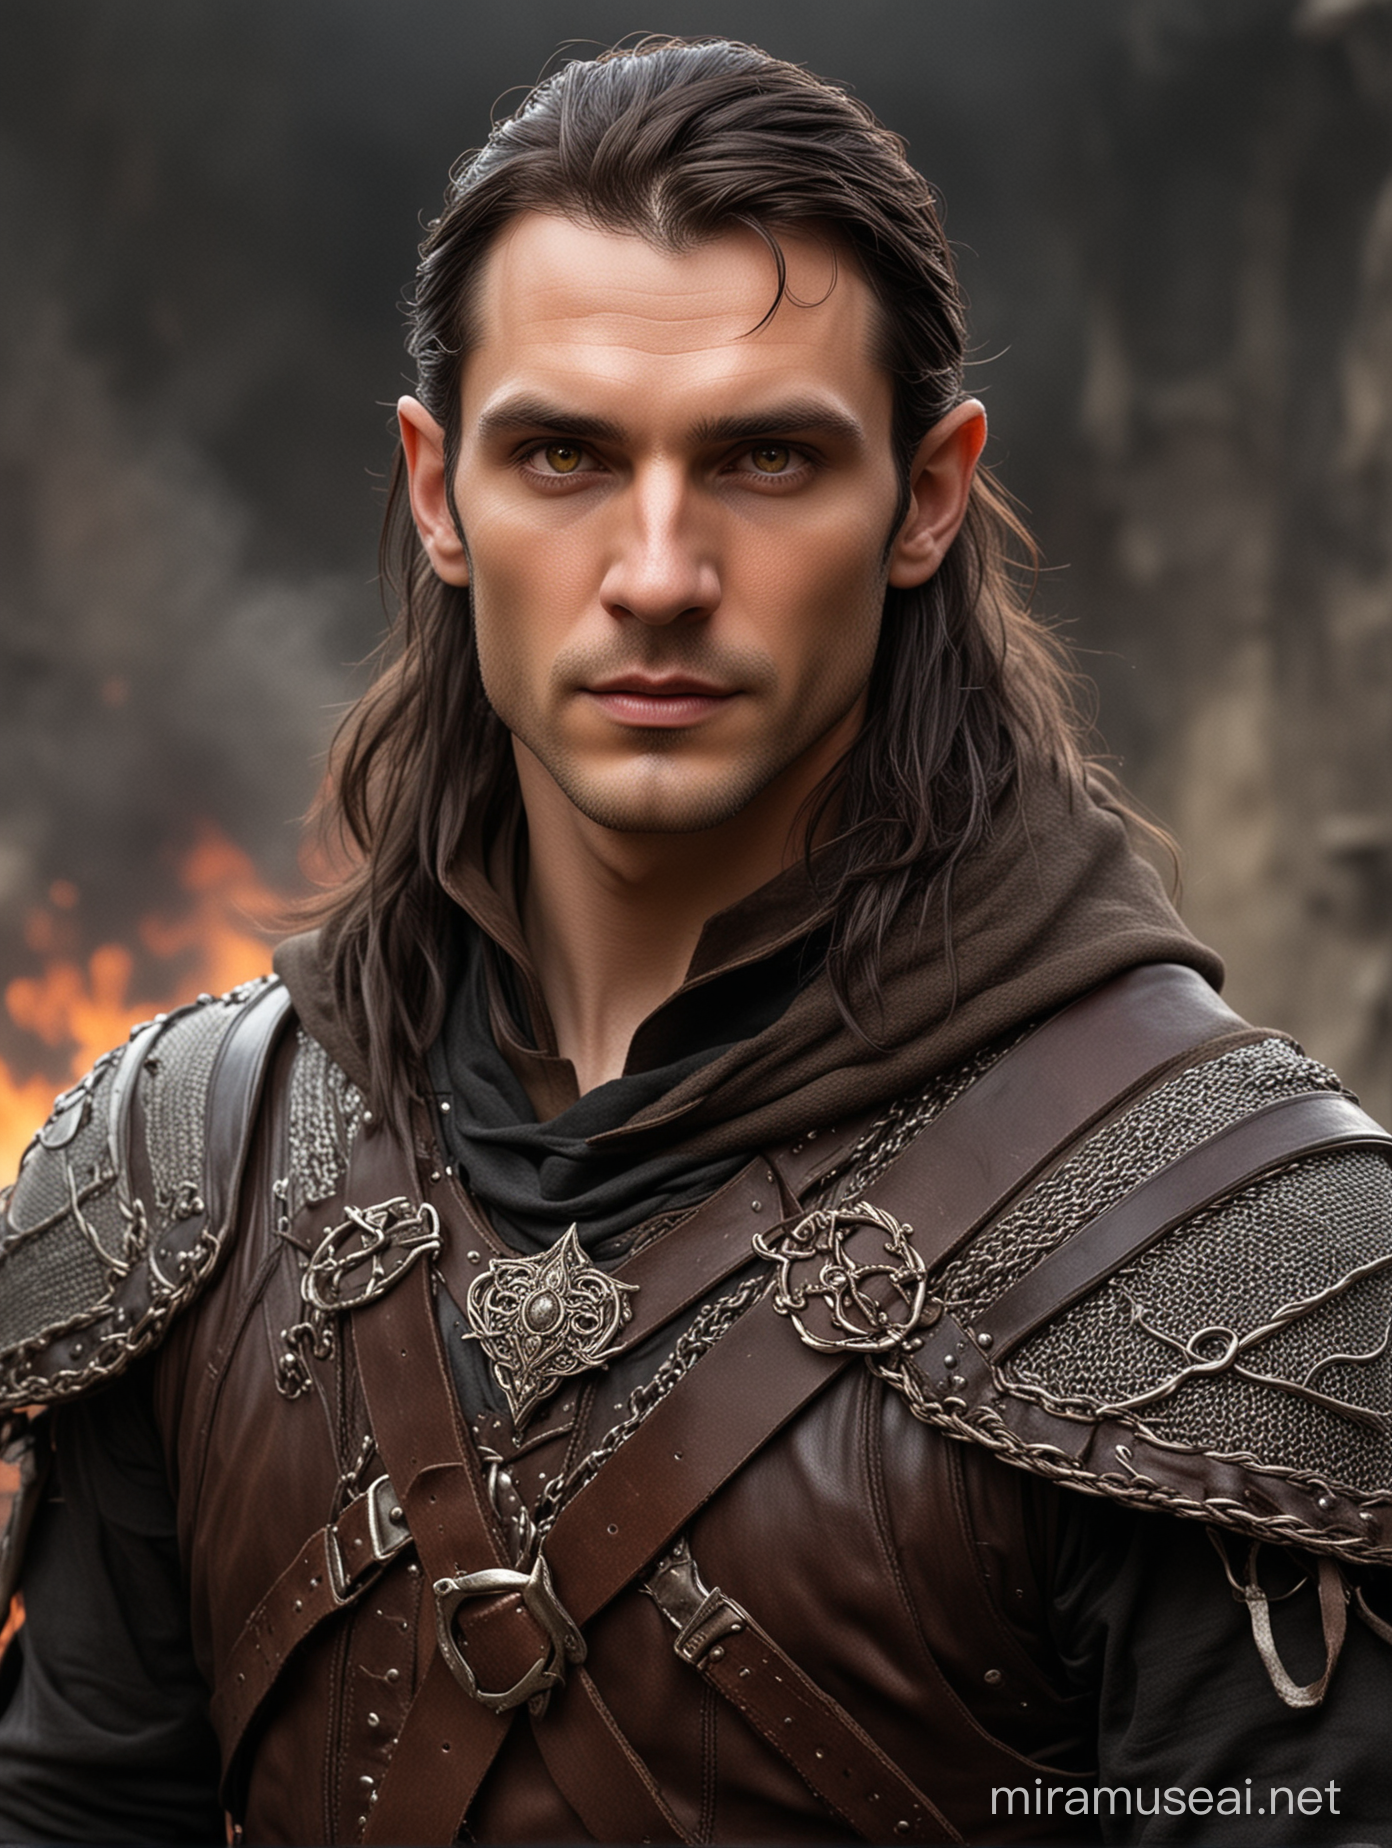 A male elf, middle-aged. High cheekbones, strong jaw, stubble, pointed elf ears. Pale skin. Long, dark hair, held back by woven leather headband. Amber-colored eyes, smoldering with arcane fire. Medieval fantasy-style leather armor, with chainmail underneath. Wizard, warrior, thief mix. Dungeons and Dragons style. Wearing a hooded cloak, hood up, the cloak flares behind him. Indiana Jones style outfit in a medieval fantasy style. bags, satchels, and potions at his belt. full body image.